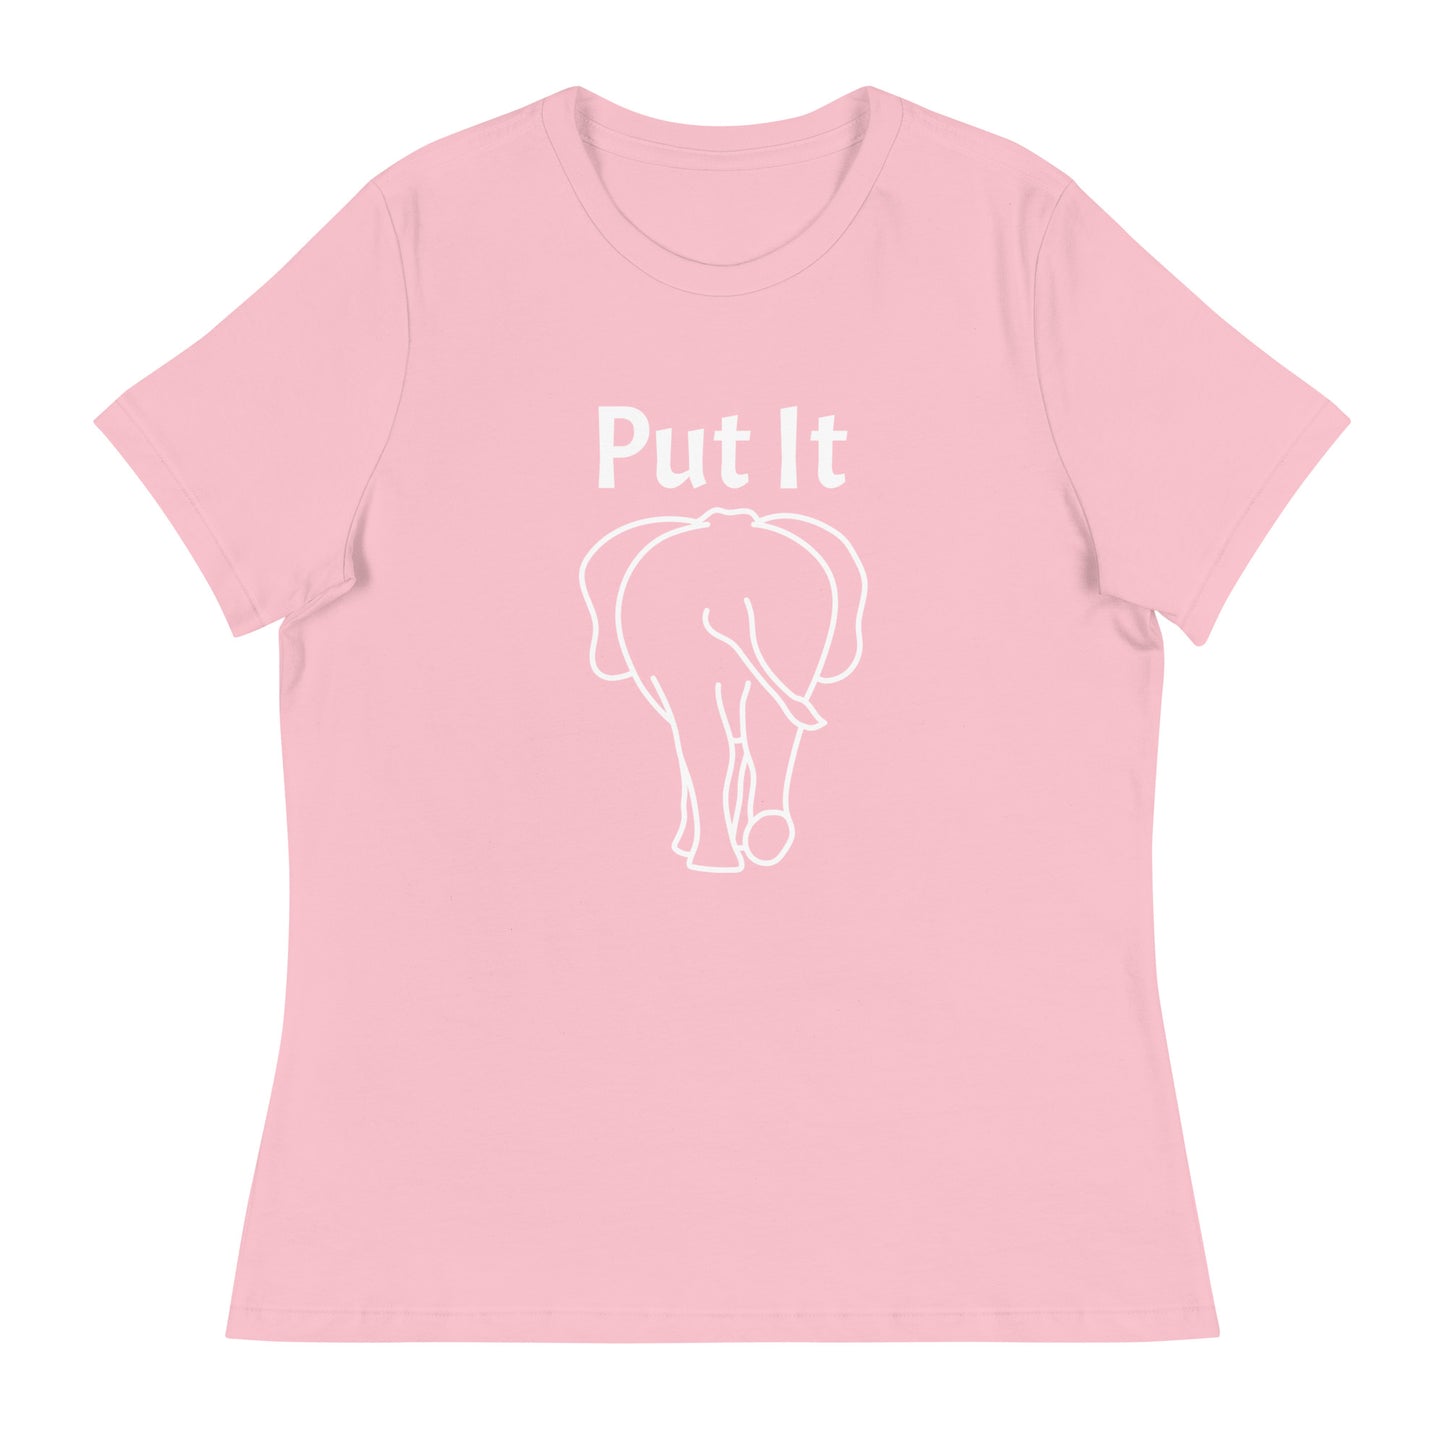 Women's Relaxed Soft & Smooth Premium Quality T-Shirt Premium Quality Put It Behind Elephant Tee Design